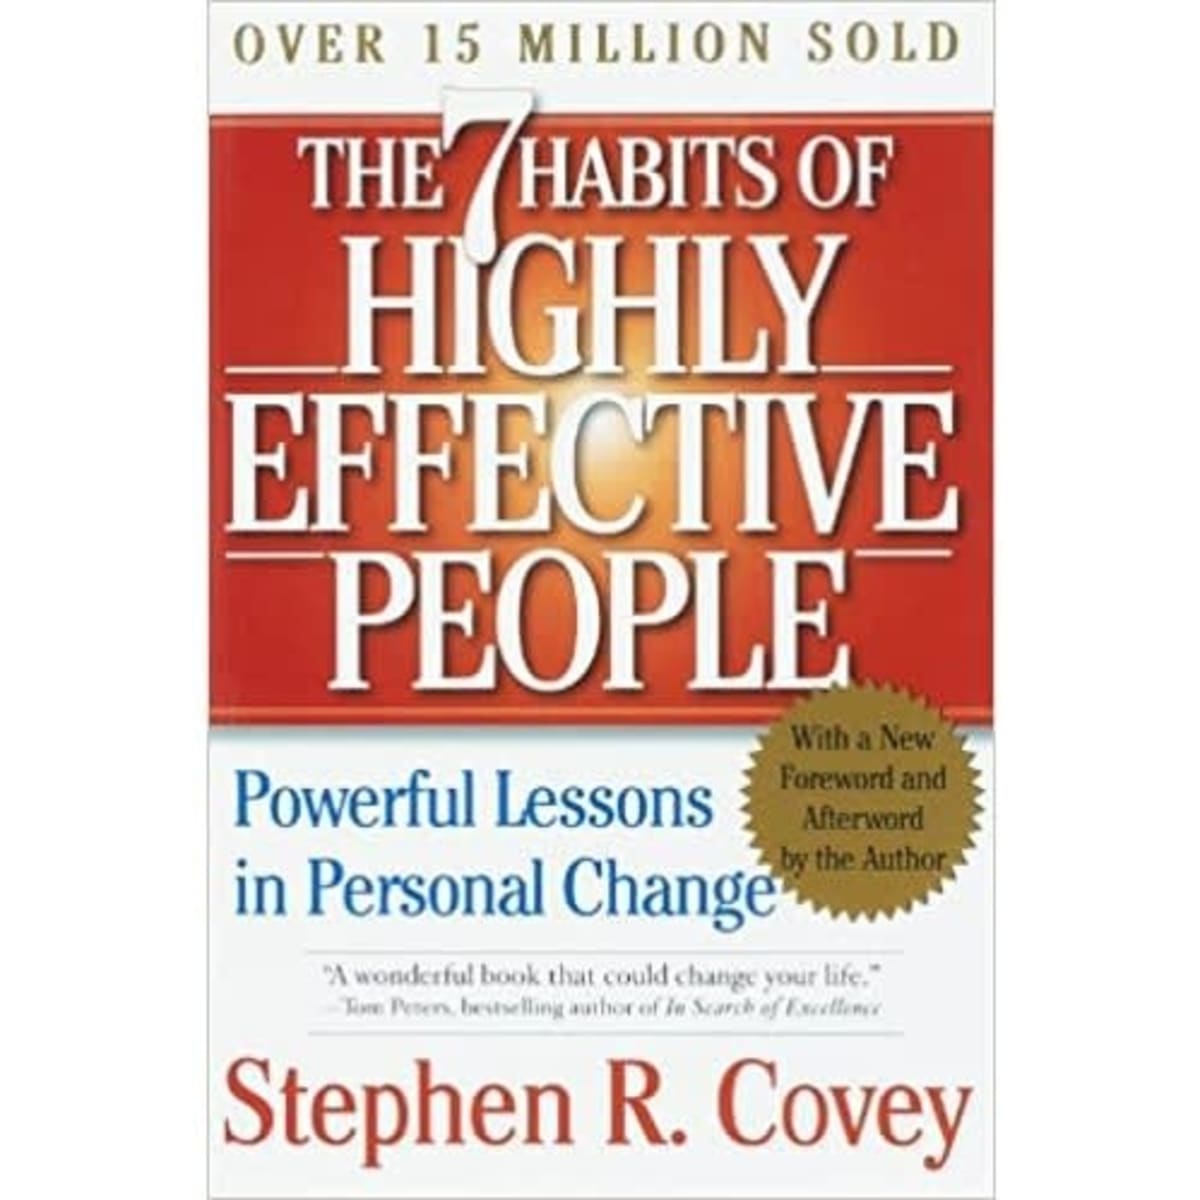 Of　Personal　Online　Powerful　Konga　People:　Highly　Effective　Change　In　Lessons　Habits　The　Shopping